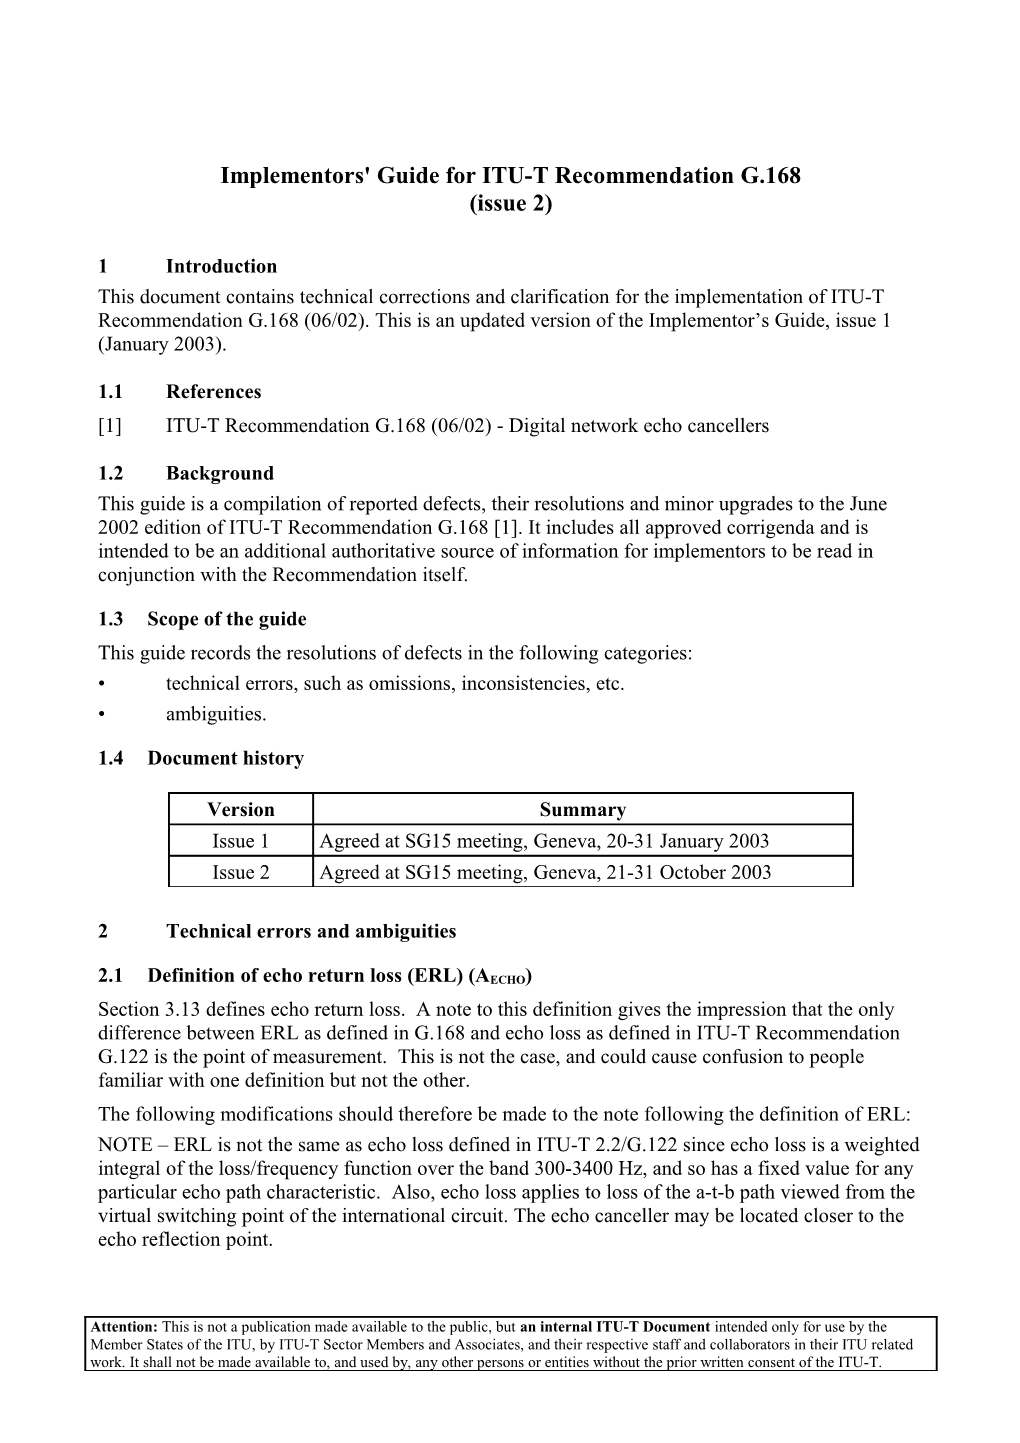 Implementors' Guide for ITU-T Recommendation G.168 (Issue 2)